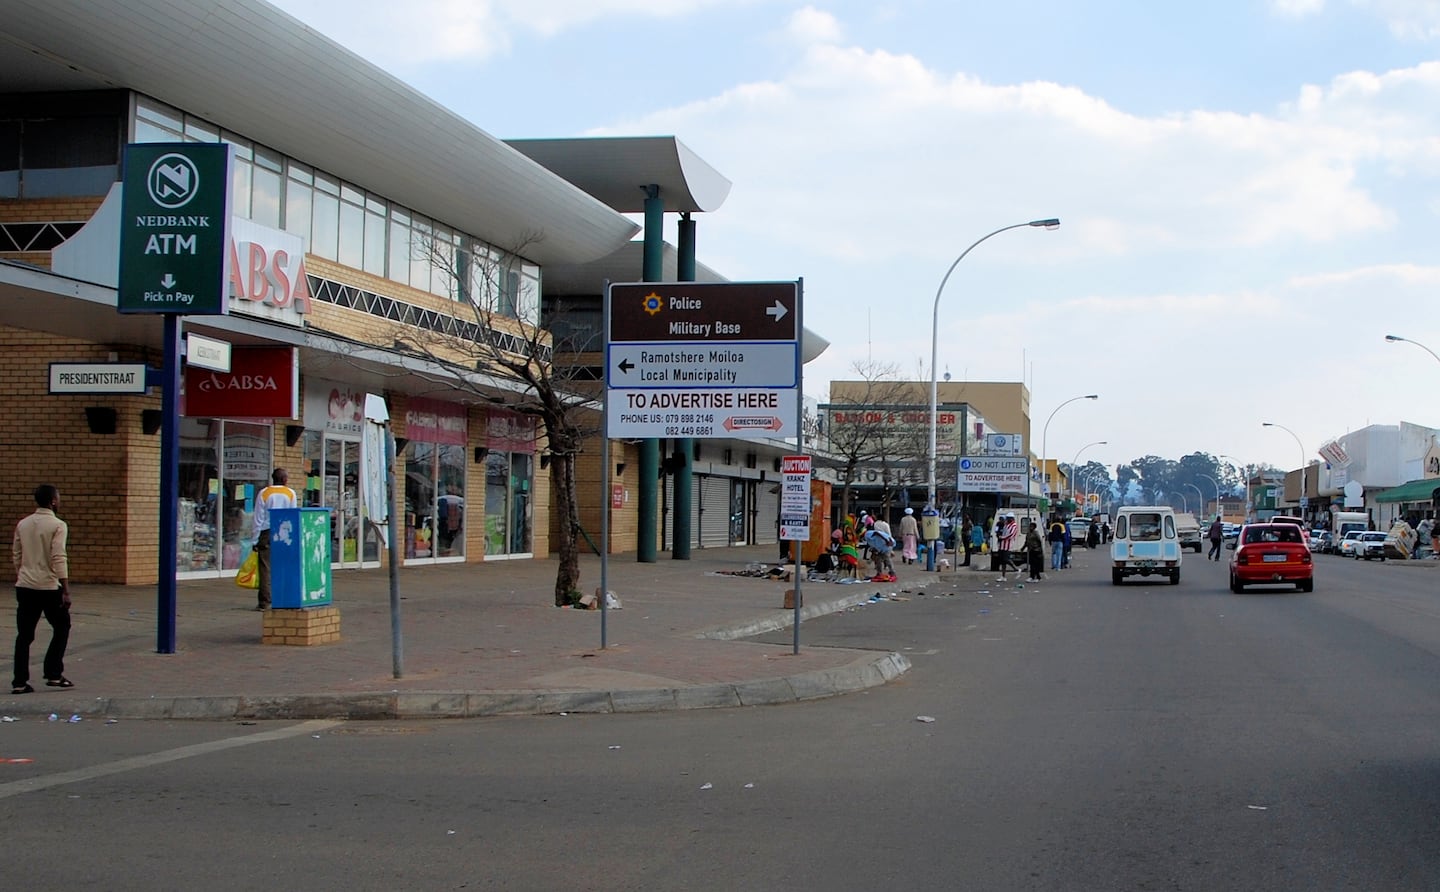 Zeerust is a transit town between South Africa and Botswana. Photo by Ossewa, via Wikimedia Commons